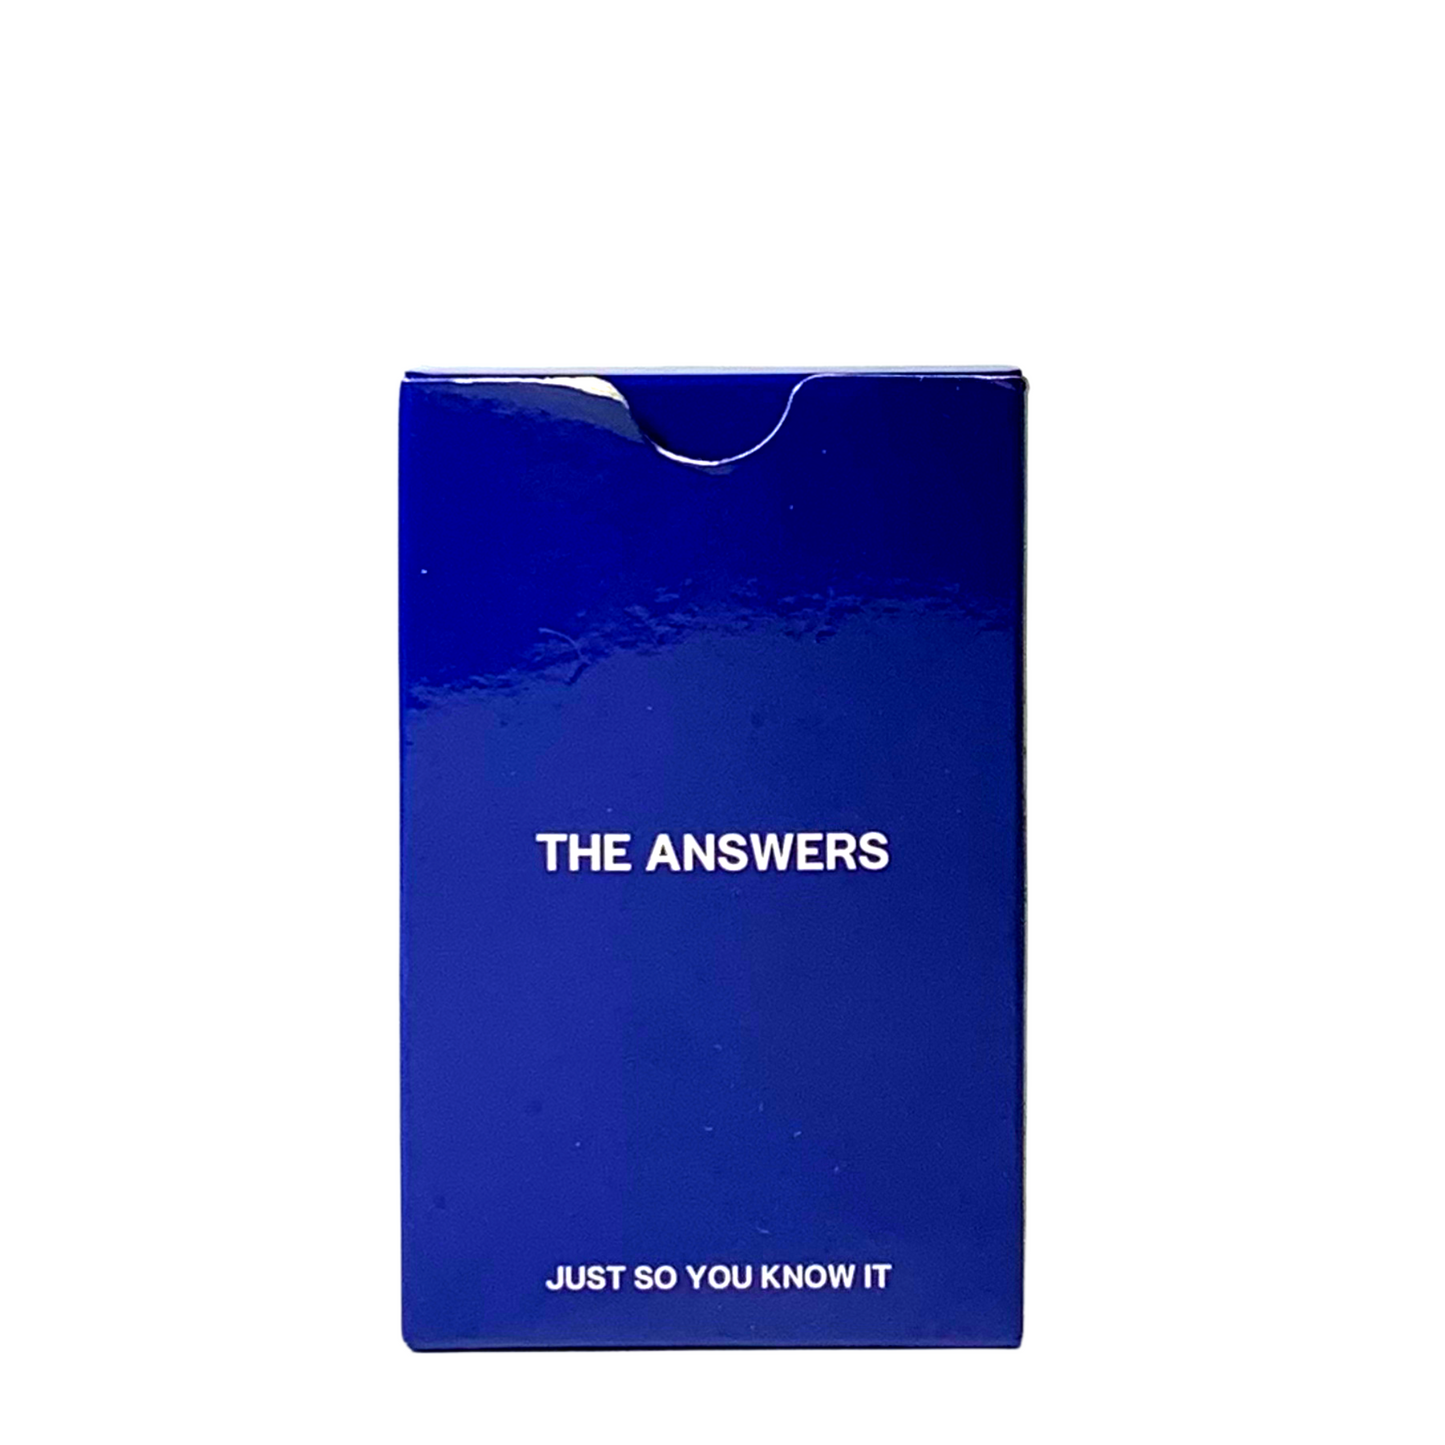 THE ANSWERS